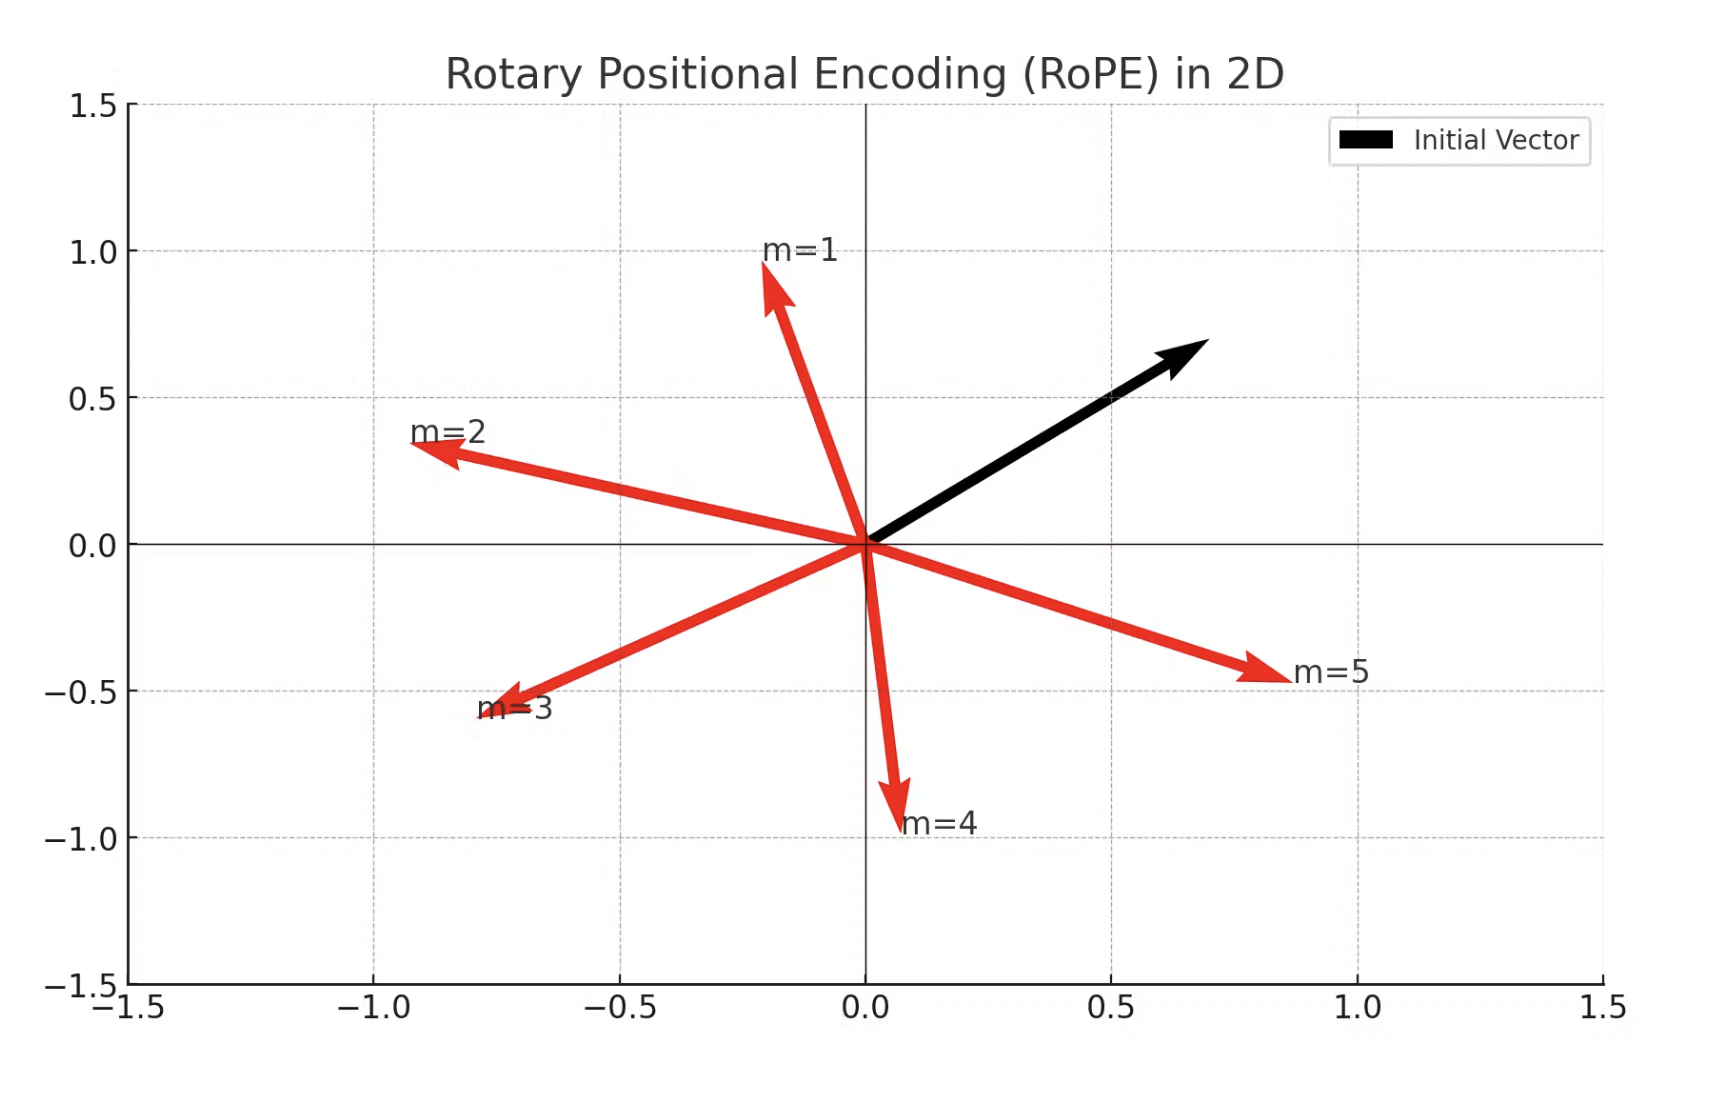 RoPE: Rotary Positional Embedding